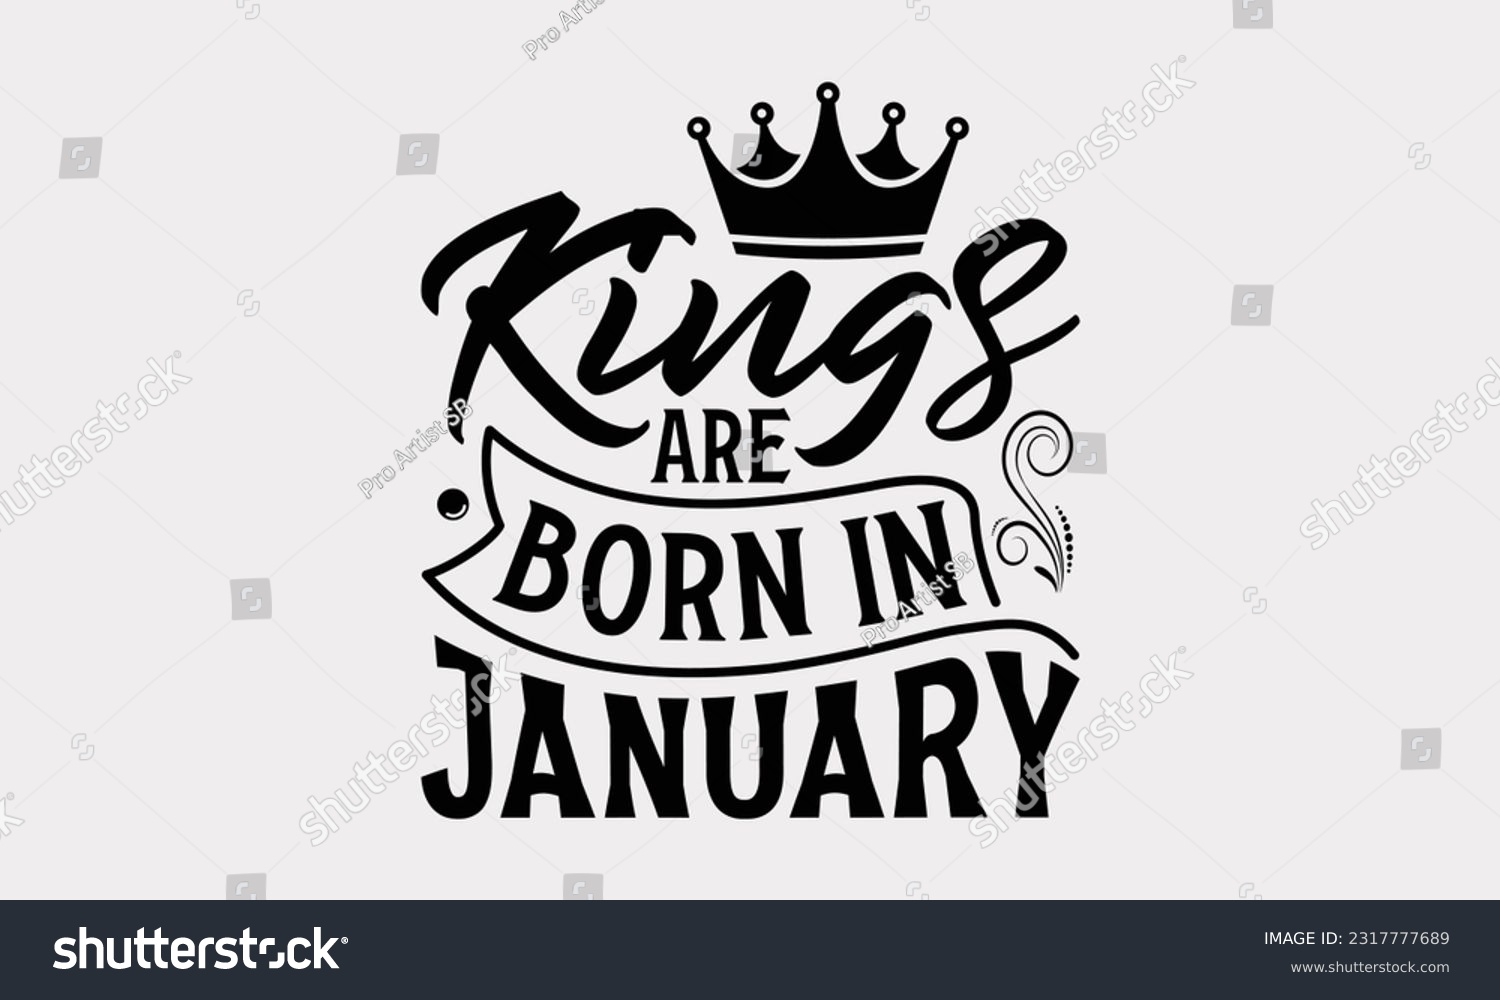 SVG of Kings Are Born In January - Birthday Month T-Shirt Design, Motivational Inspirational SVG Quotes, Hand Drawn Vintage Illustration With Hand-Lettering And Decoration Elements. svg